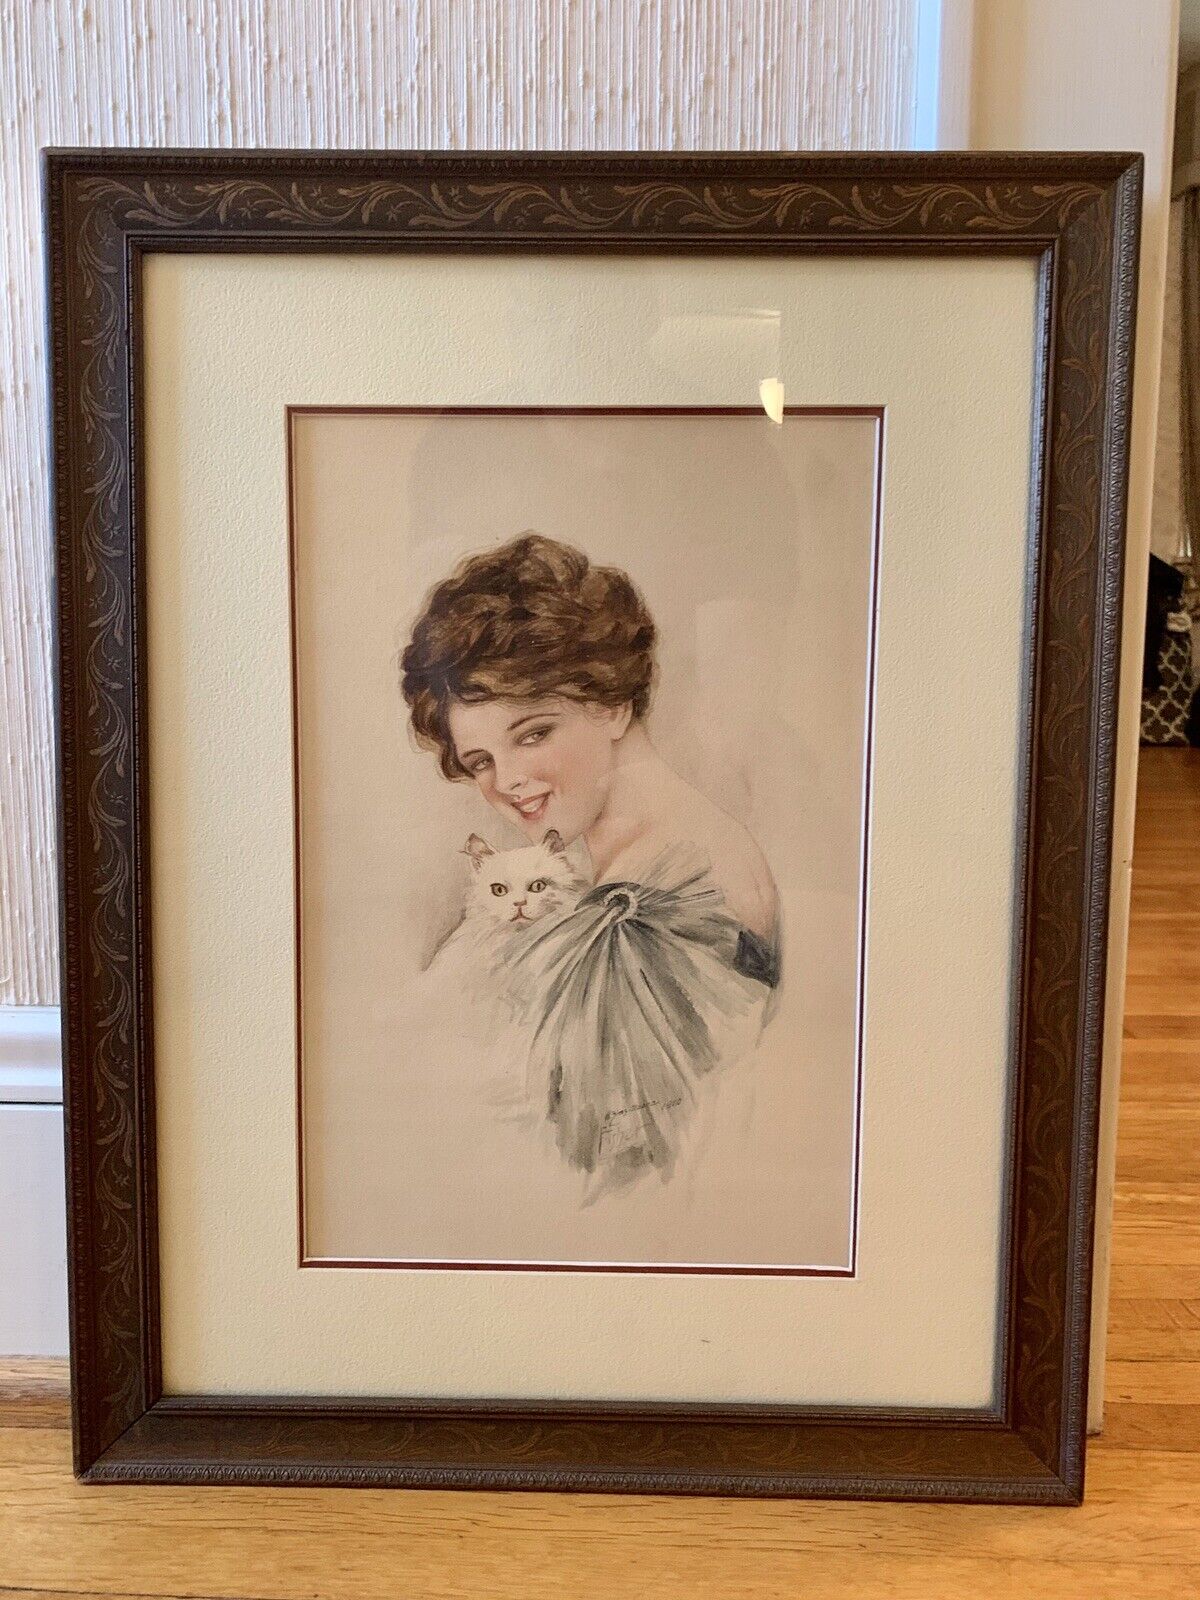 1910 vintage watercolor portrait of woman with cat- Gibson Girl quality